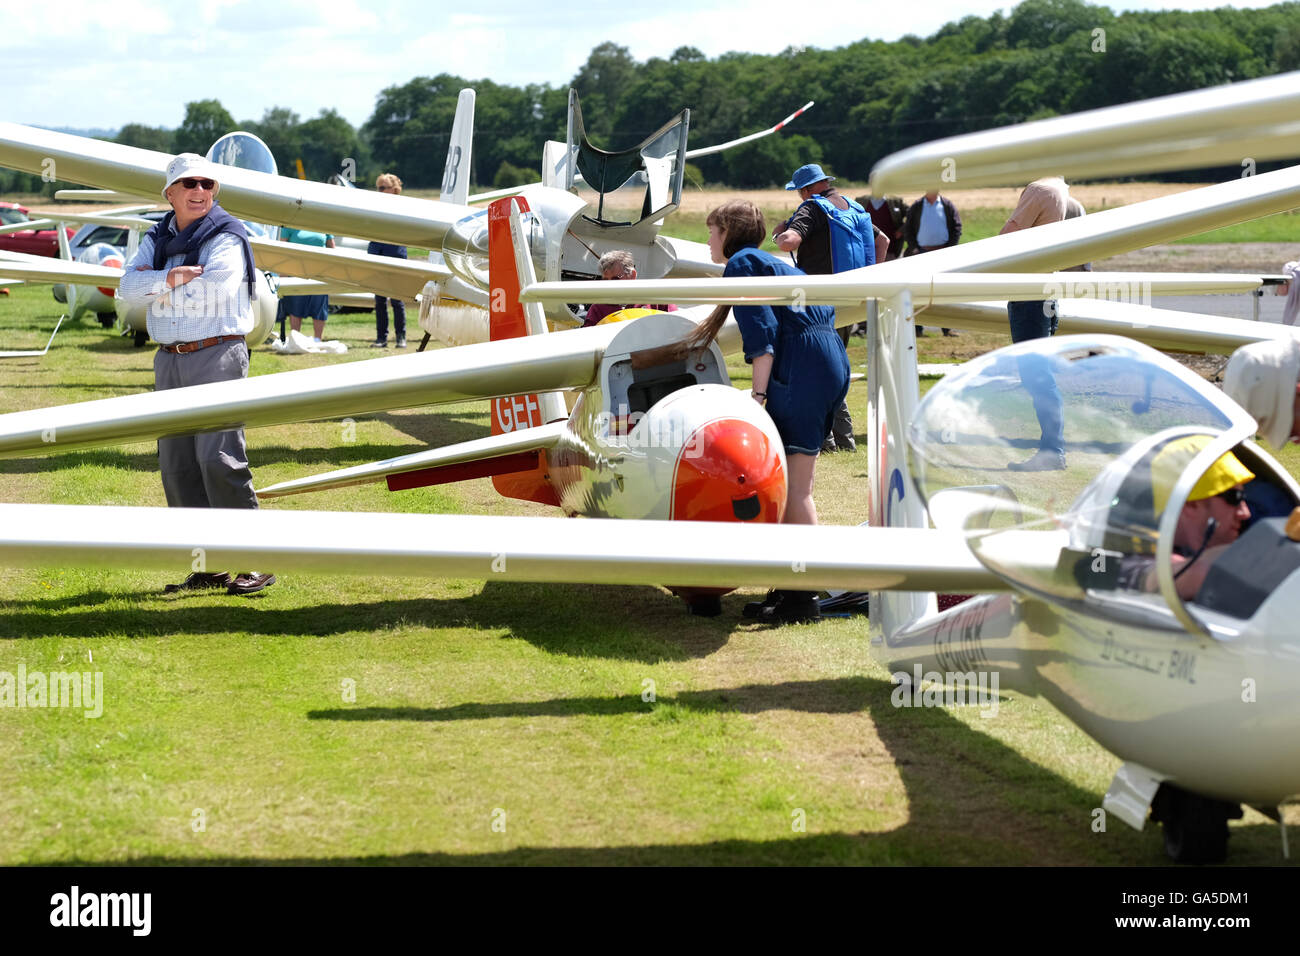 Shobdon airfield, Herefordshire, UK July 2016. Competitors and pilots enjoy a warm sunny day with temperatures up to 20c at the airfield on Day 2 of 'Competition Enterprise' a week long gliding competition at Shobdon. Stock Photo